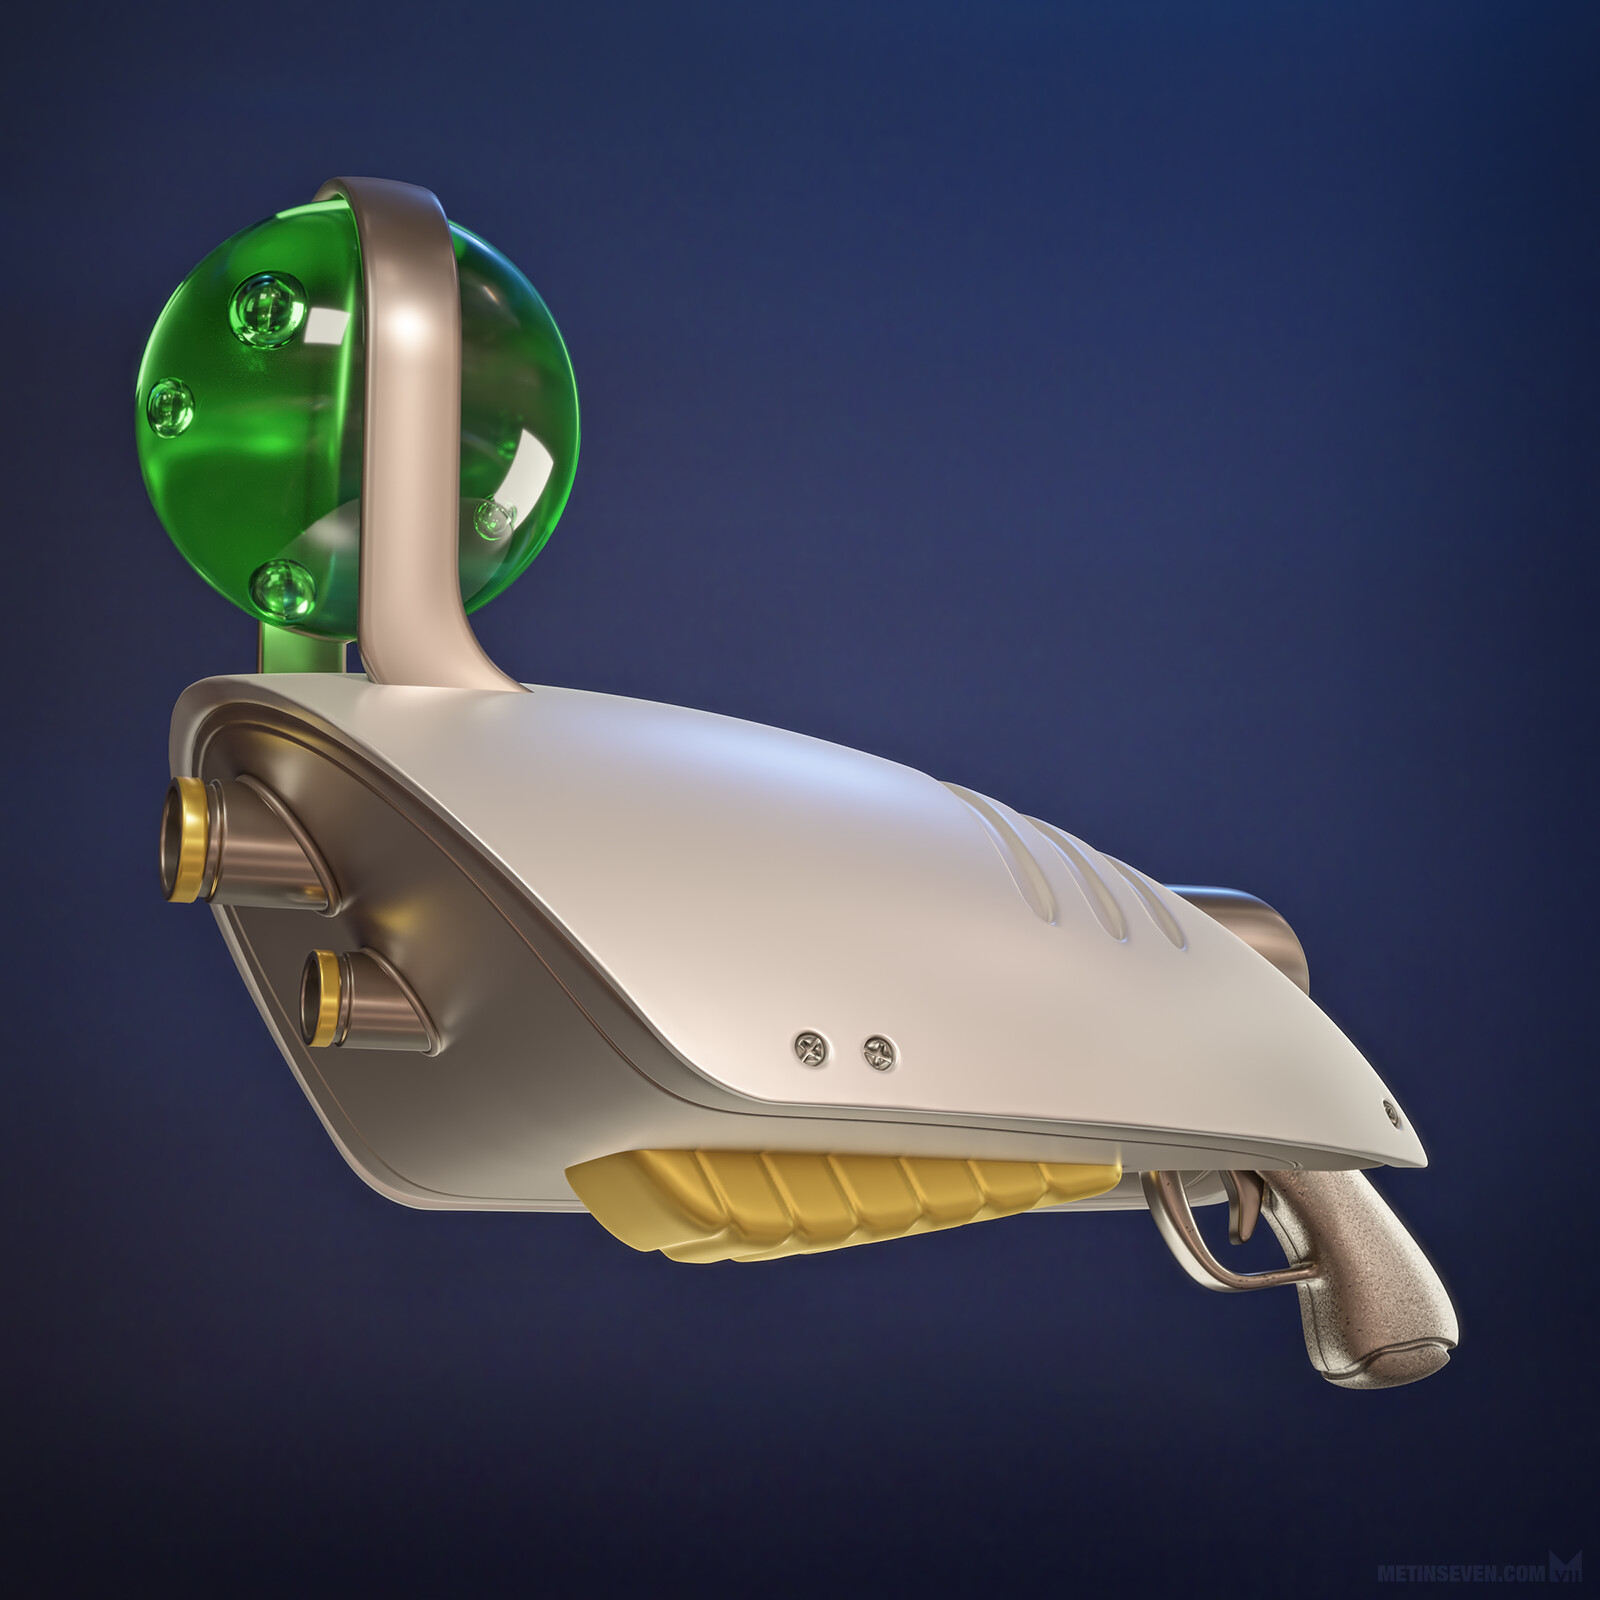 3D model of a toy ray-gun | Concept: Sam Nielson